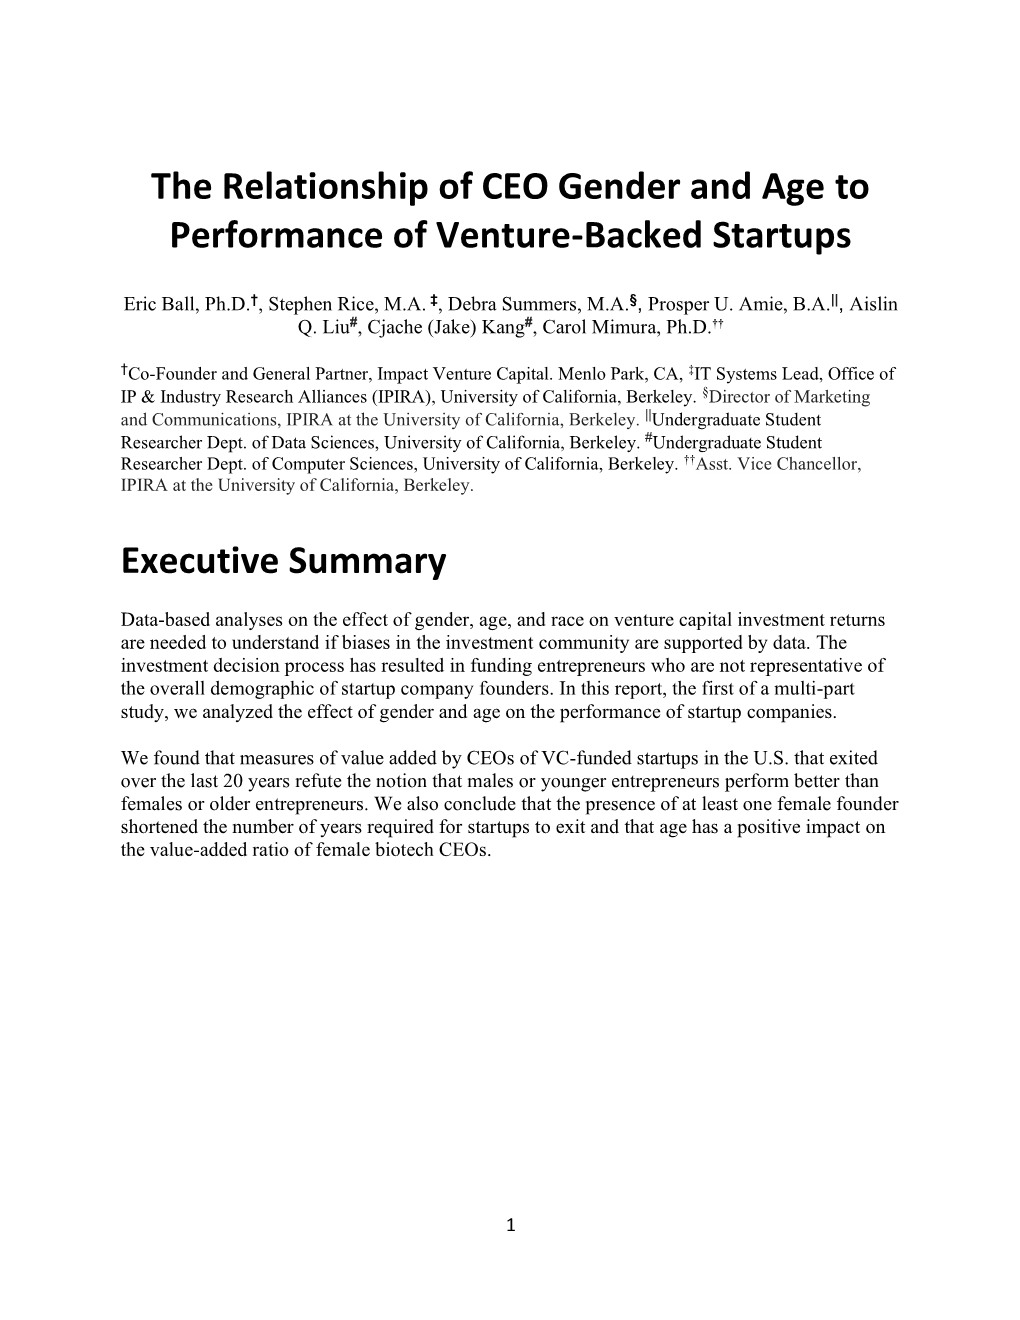 The Relationship of Gender and Age to Performance of Venture Backed